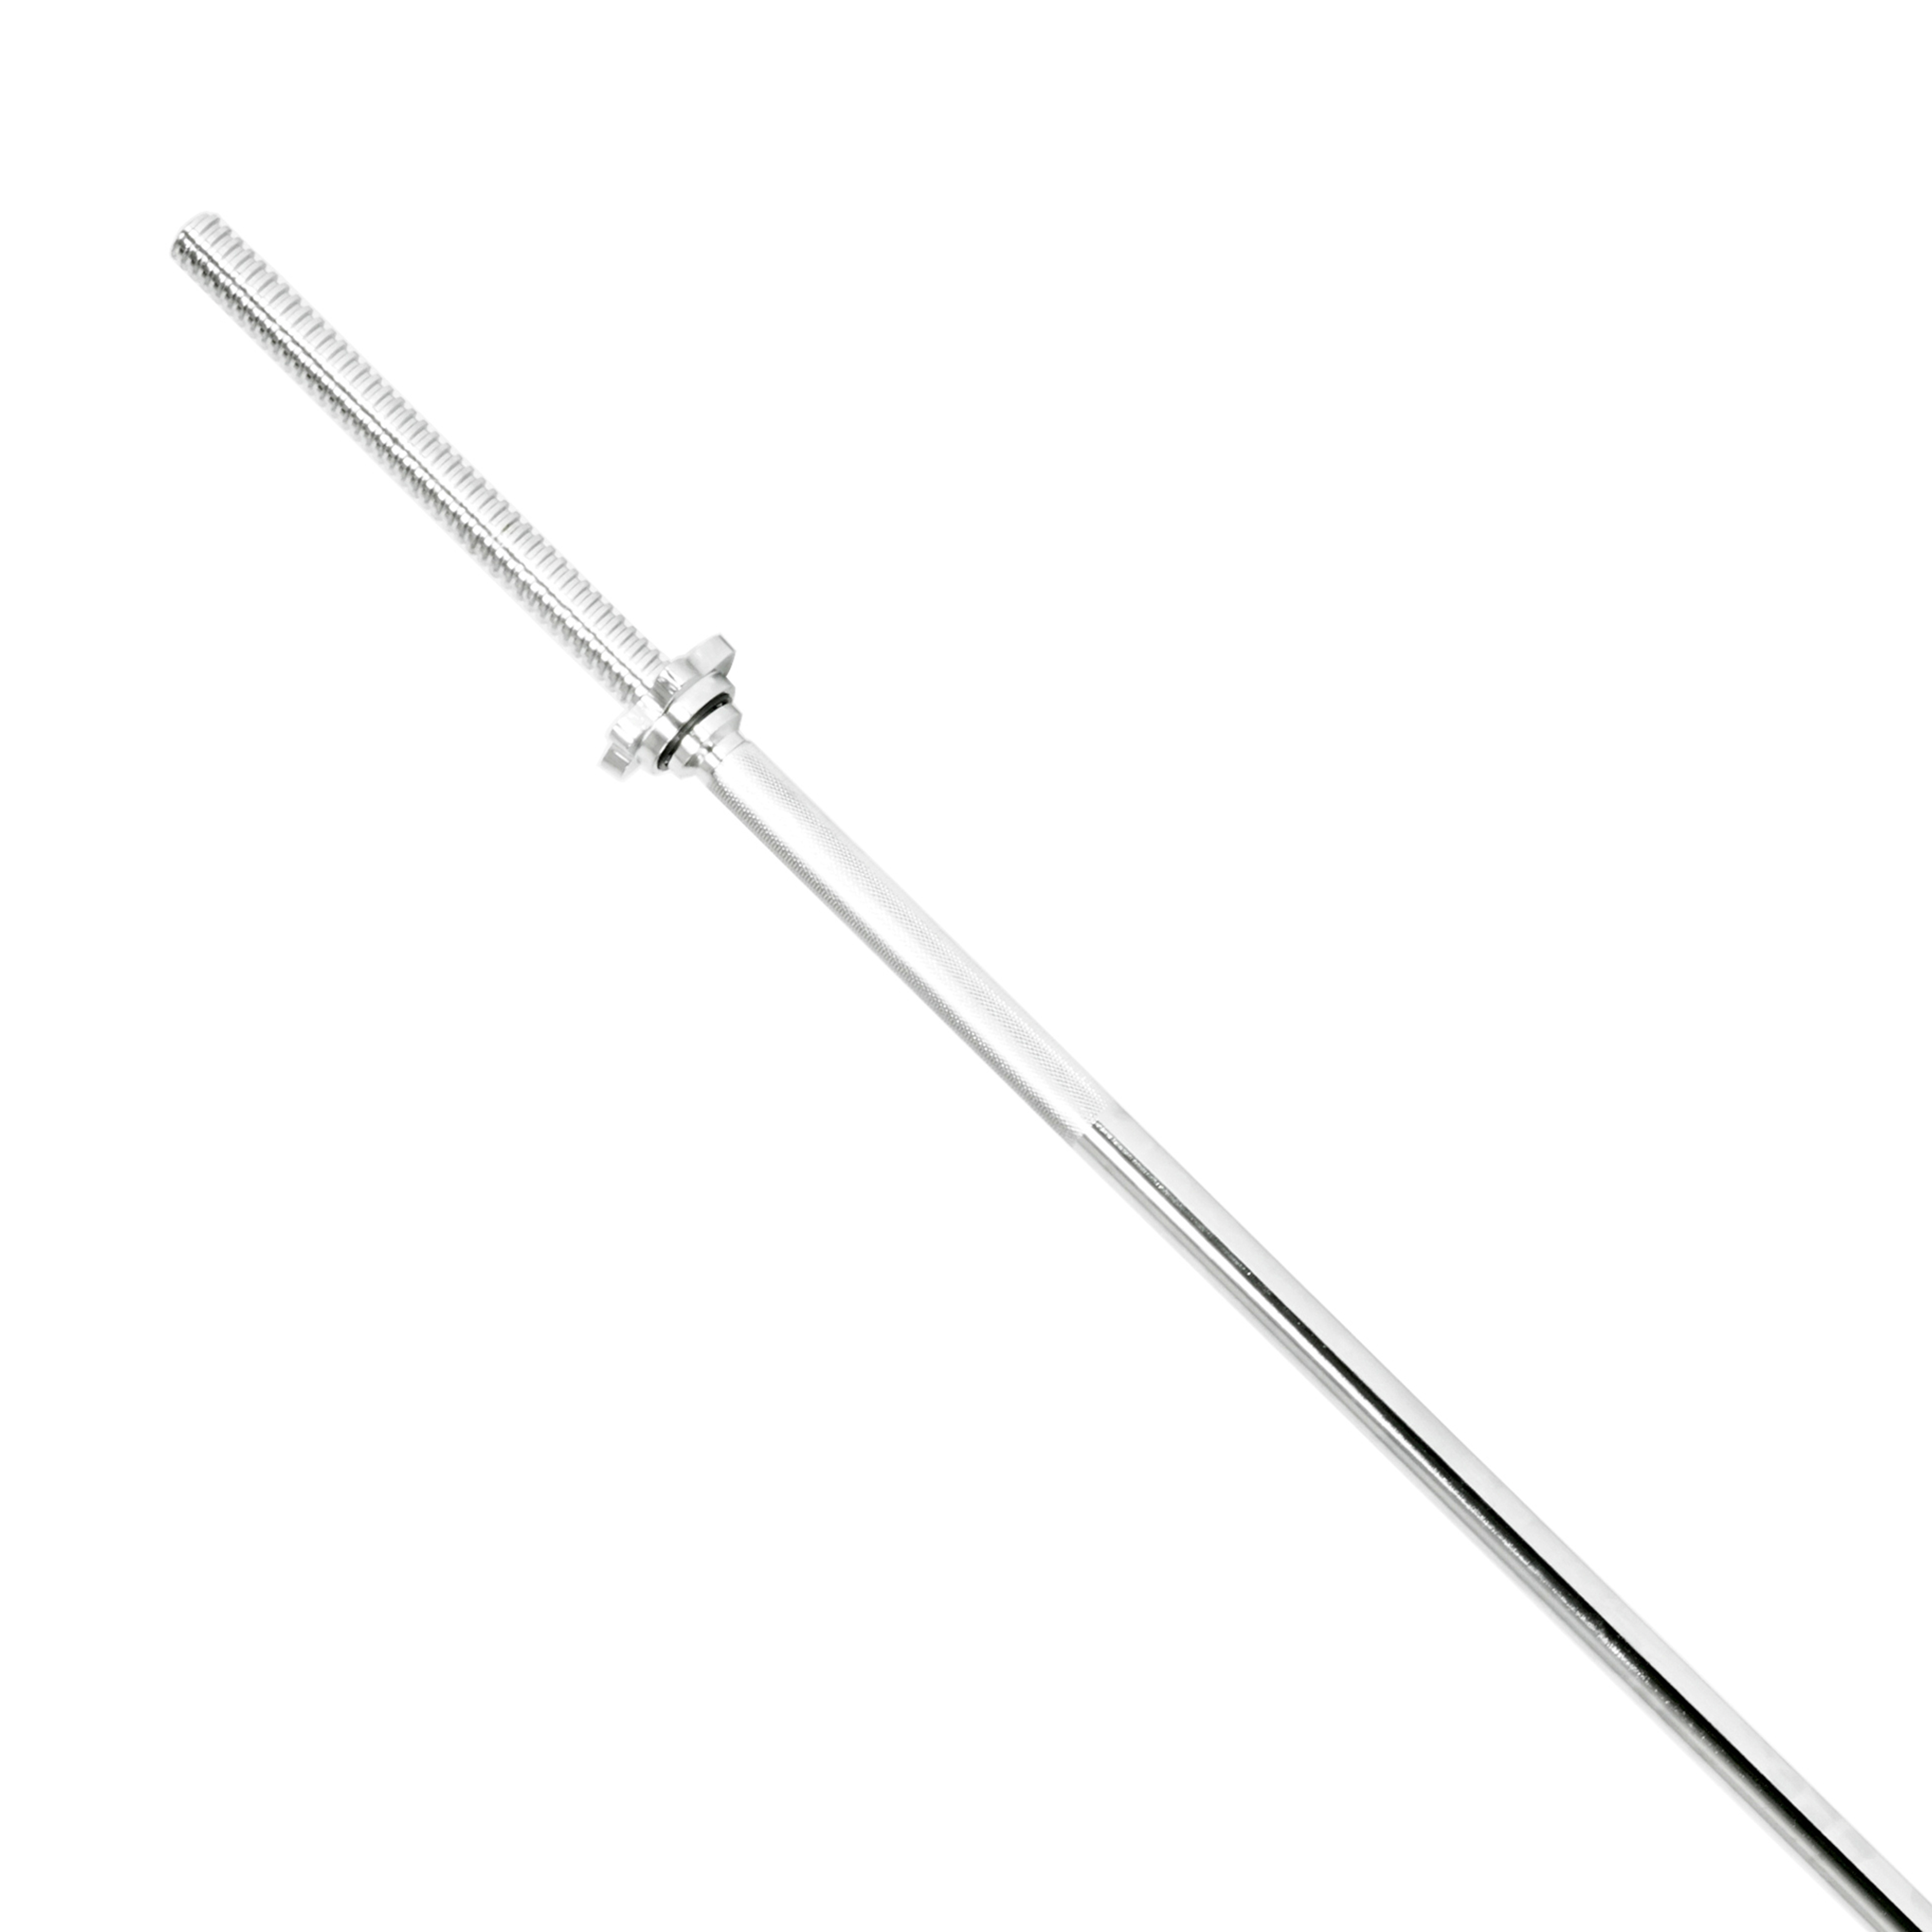 Sunny Health & Fitness Threaded Solid 60" Chrome Exercise Barbell Bar w/ 1" Barbell Diameter, Olympic Weight Lifting Bar, STBB-60 - image 1 of 8